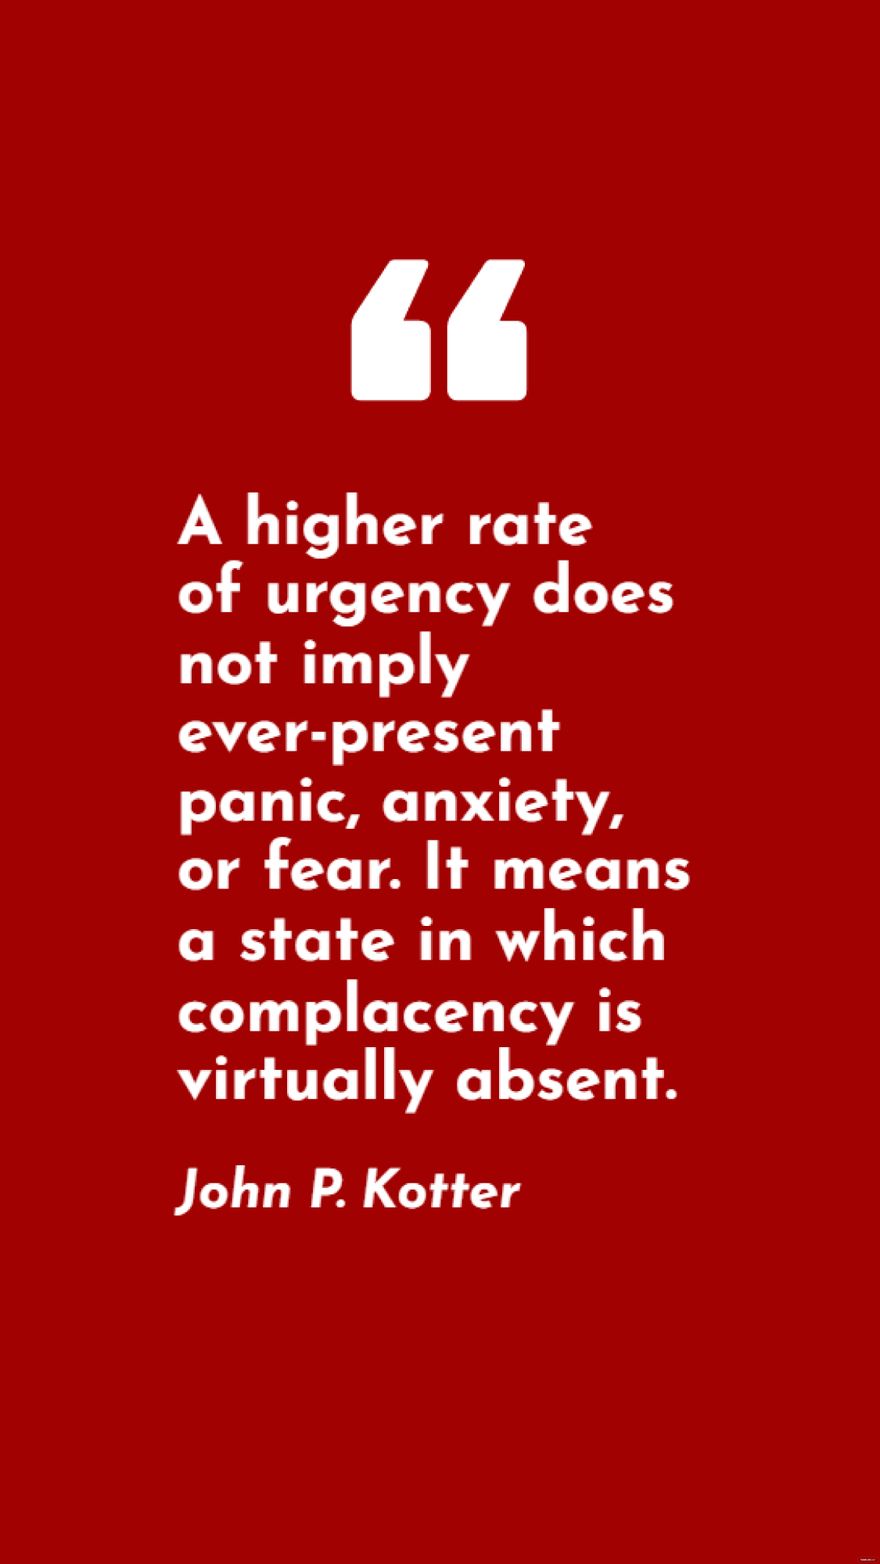 John P. Kotter - A higher rate of urgency does not imply ever-present panic, anxiety, or fear. It means a state in which complacency is virtually absent.